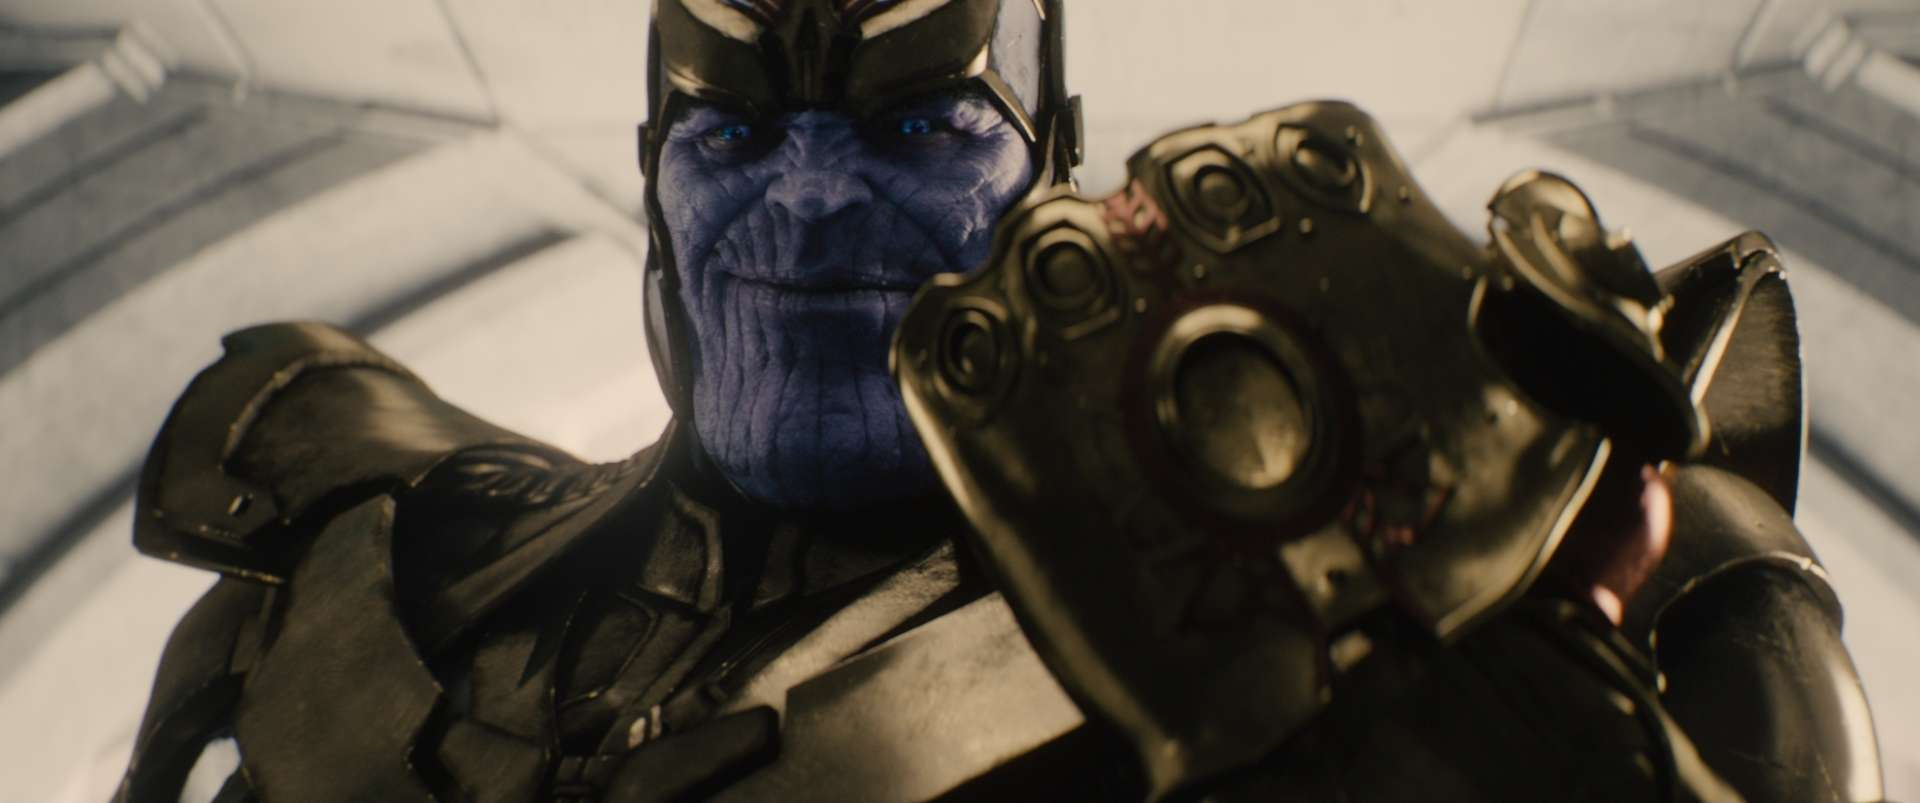 Marvel's Infinity Stone Armor Did What Thanos' Gauntlet Never Could